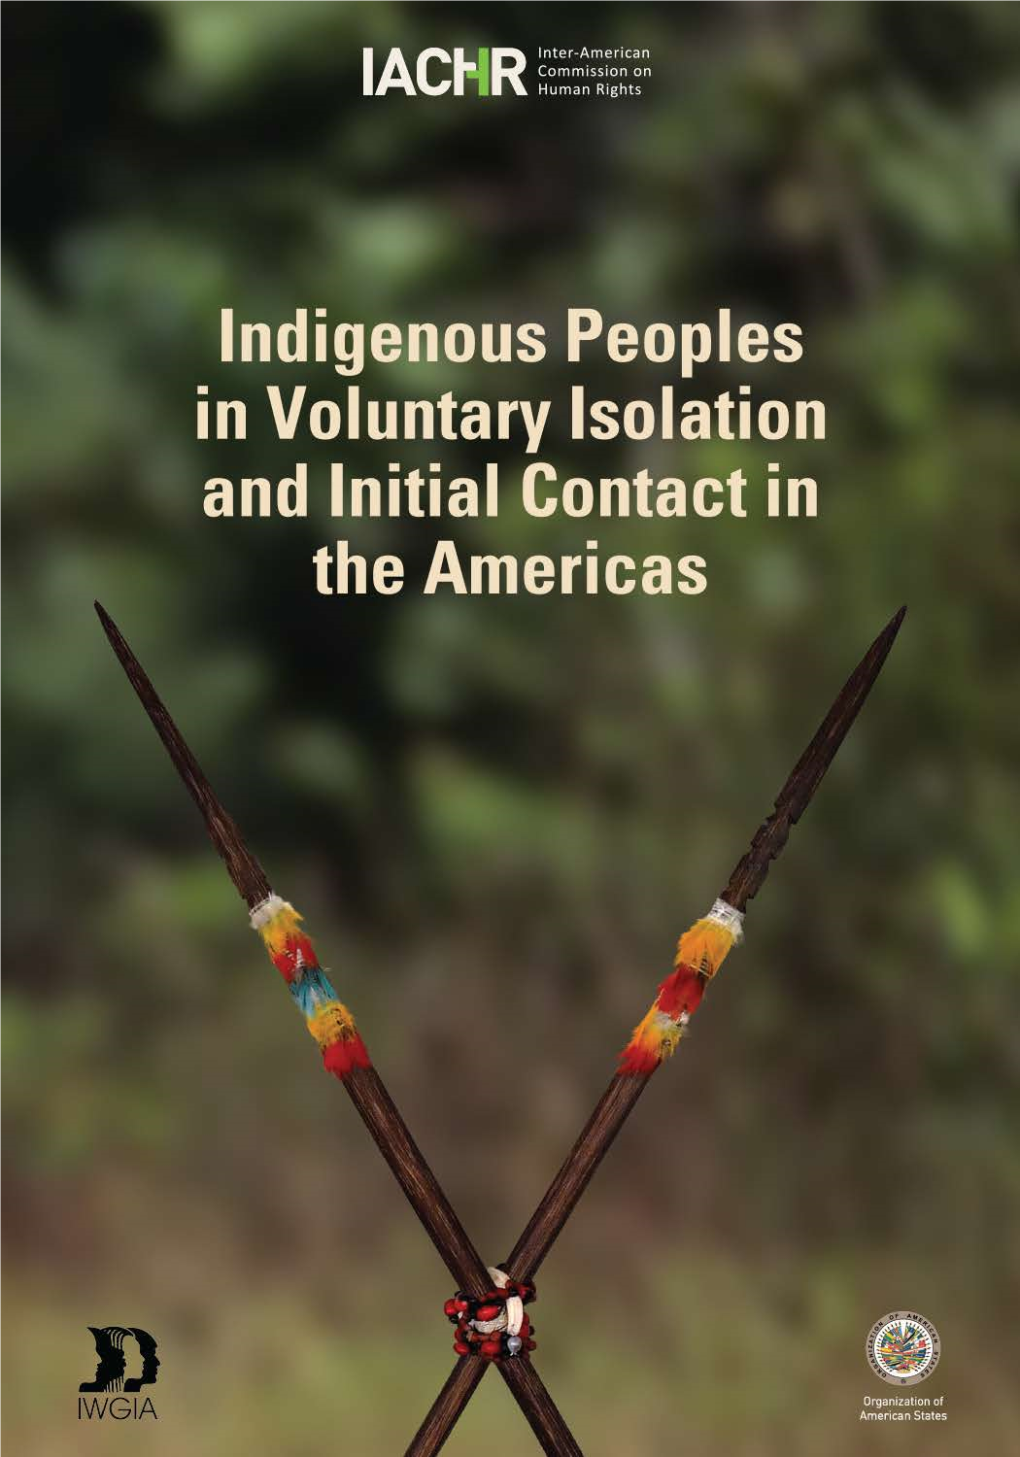 Voluntary Isolation and Initial Contact in the Americas: Recommendations for the Full Respect of Their Human Rights